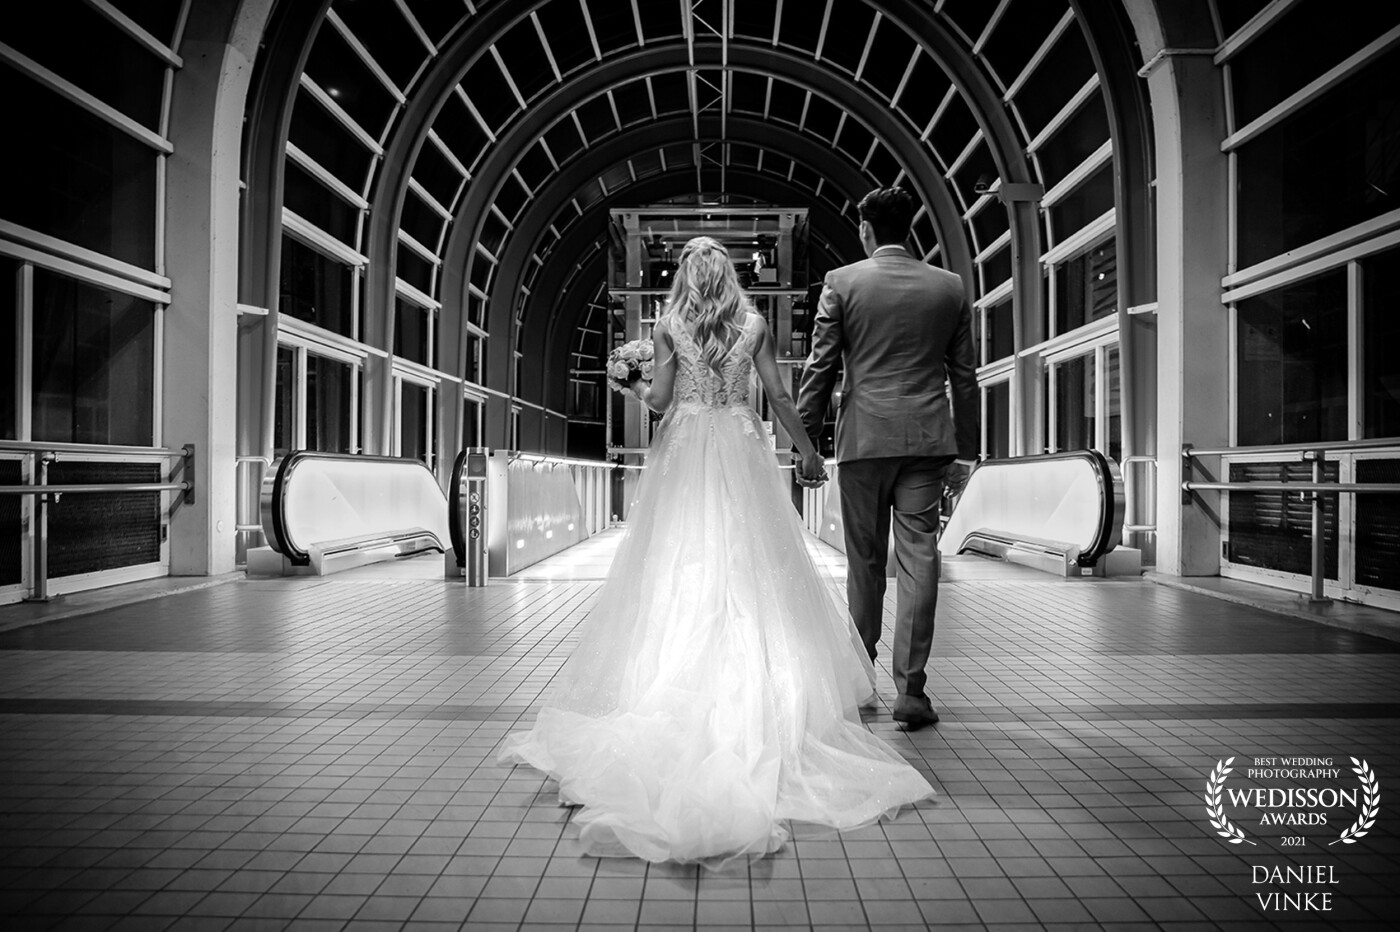 I just love the lines of this bridge. Especially in black and white! This was one of the last shots before the couple walked back and took the elevator.